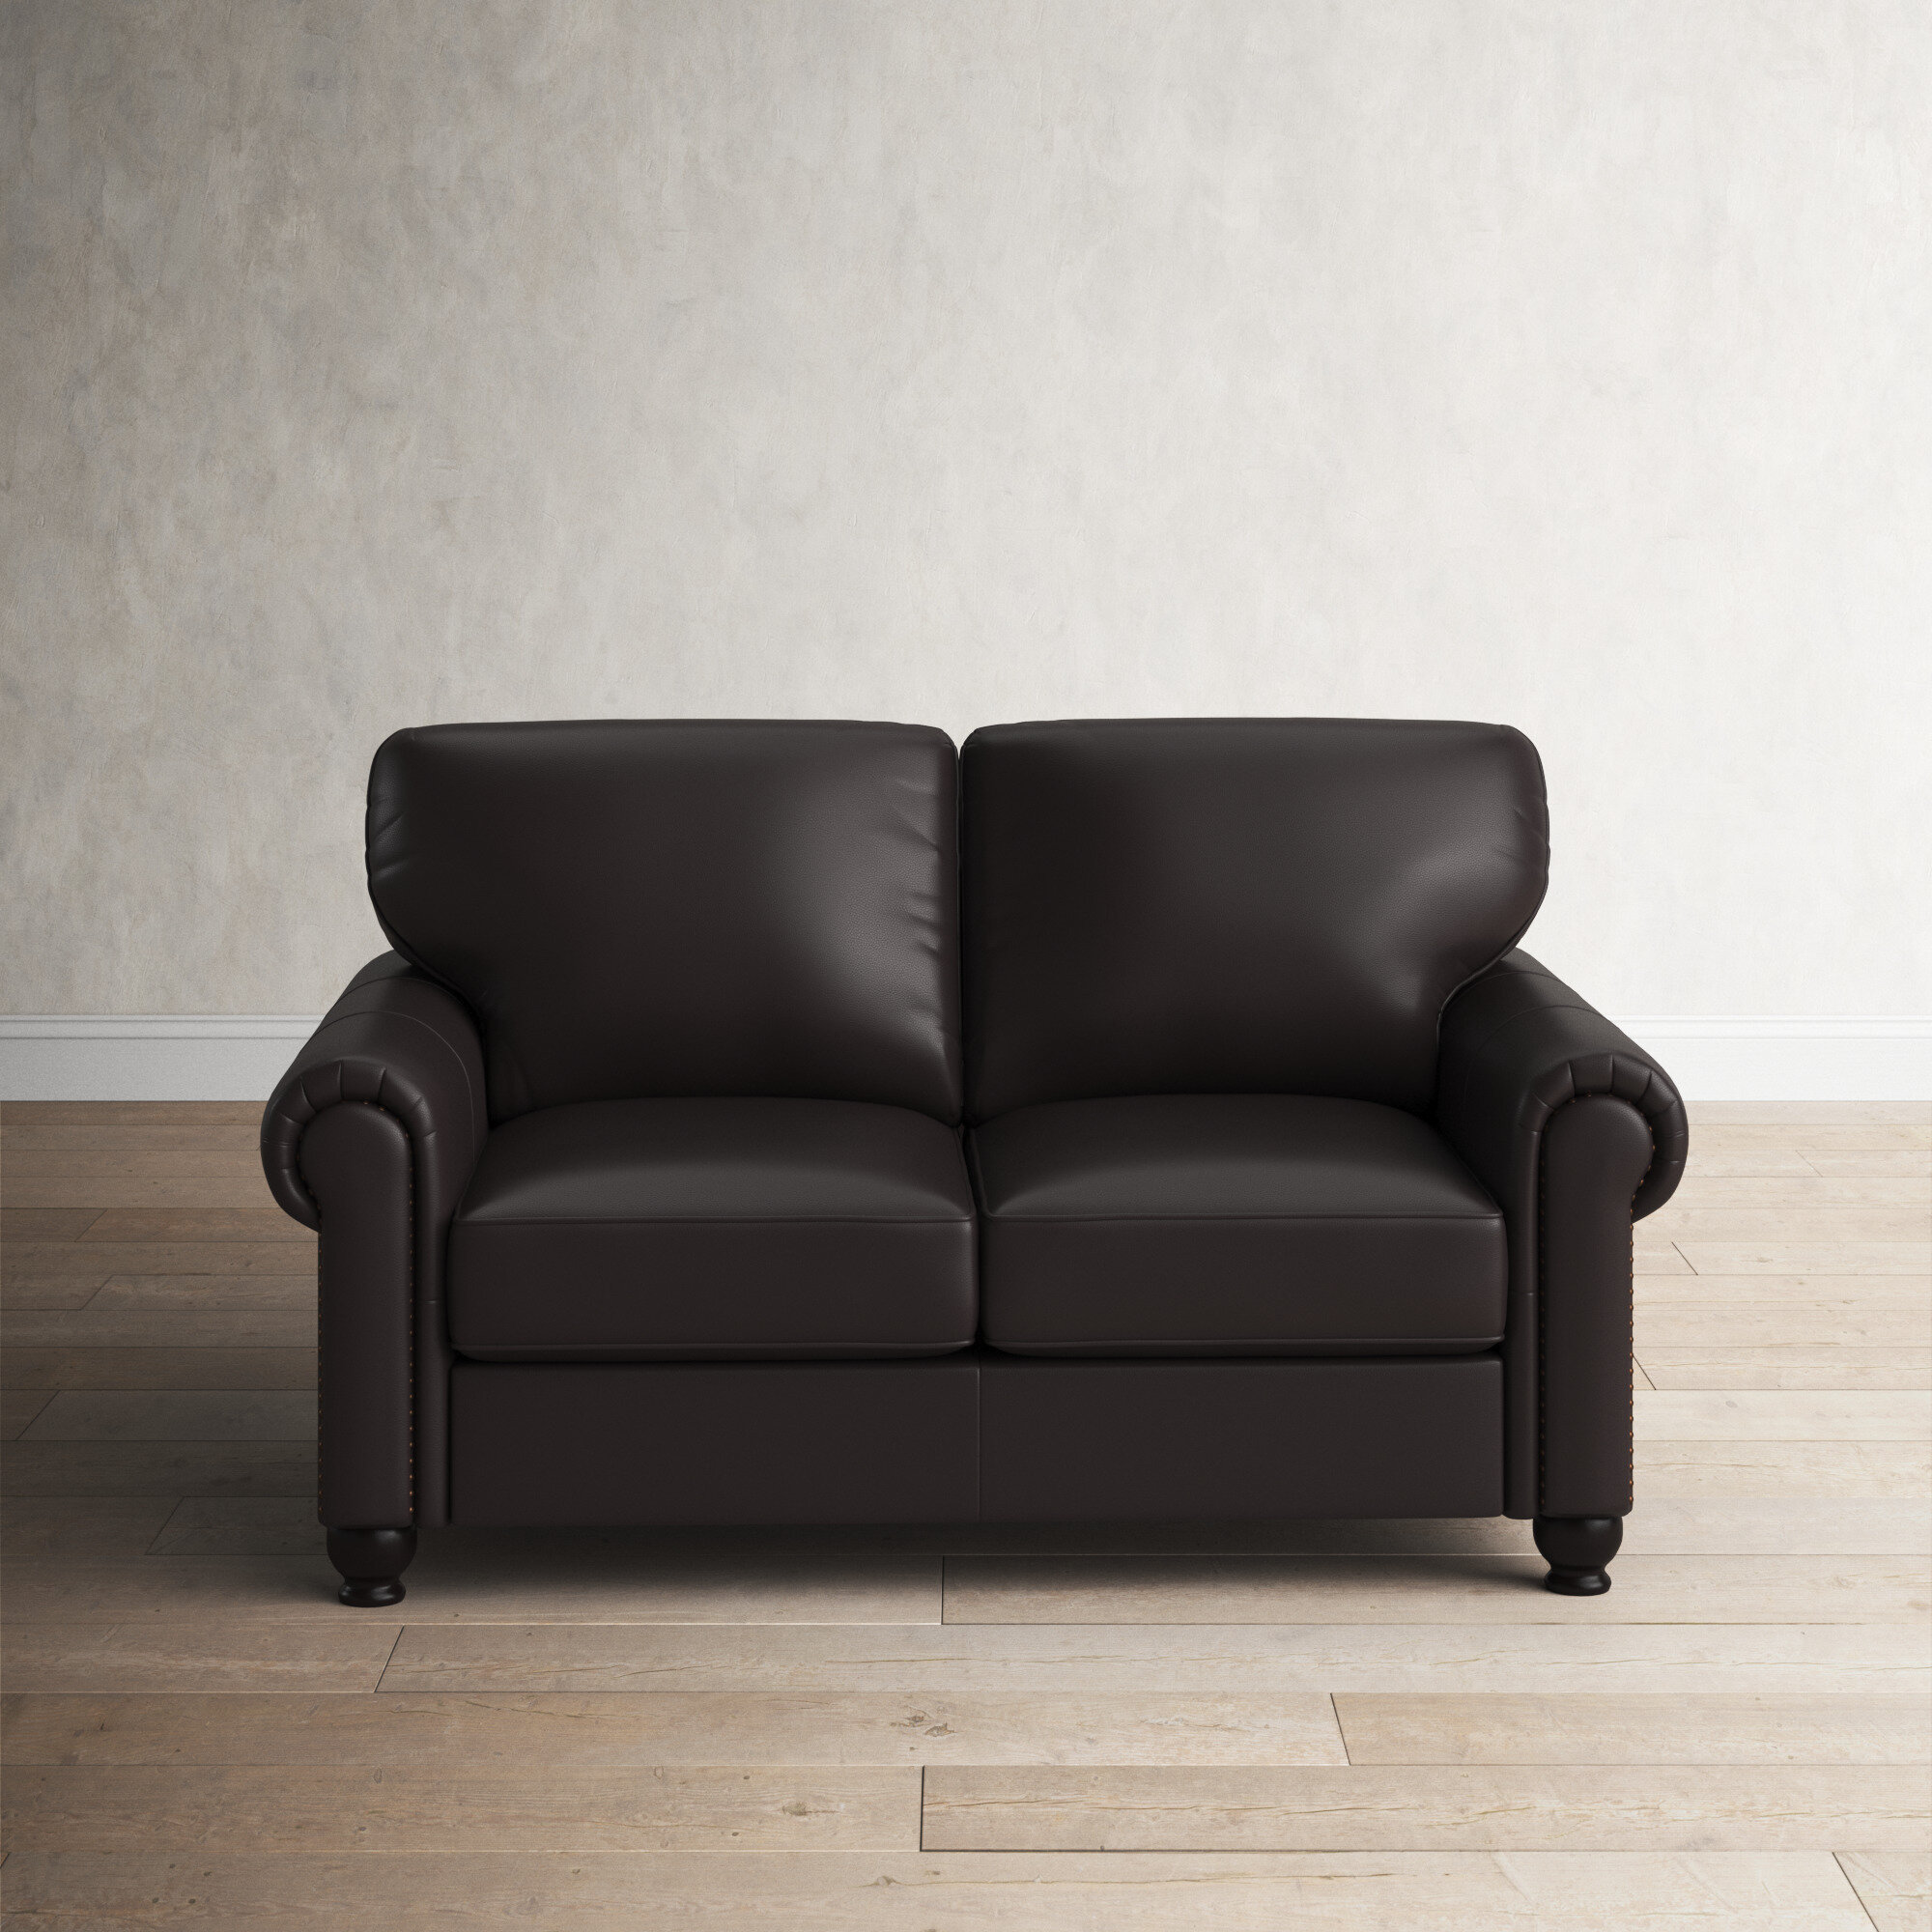 Rella 67” Rolled Arm Loveseat